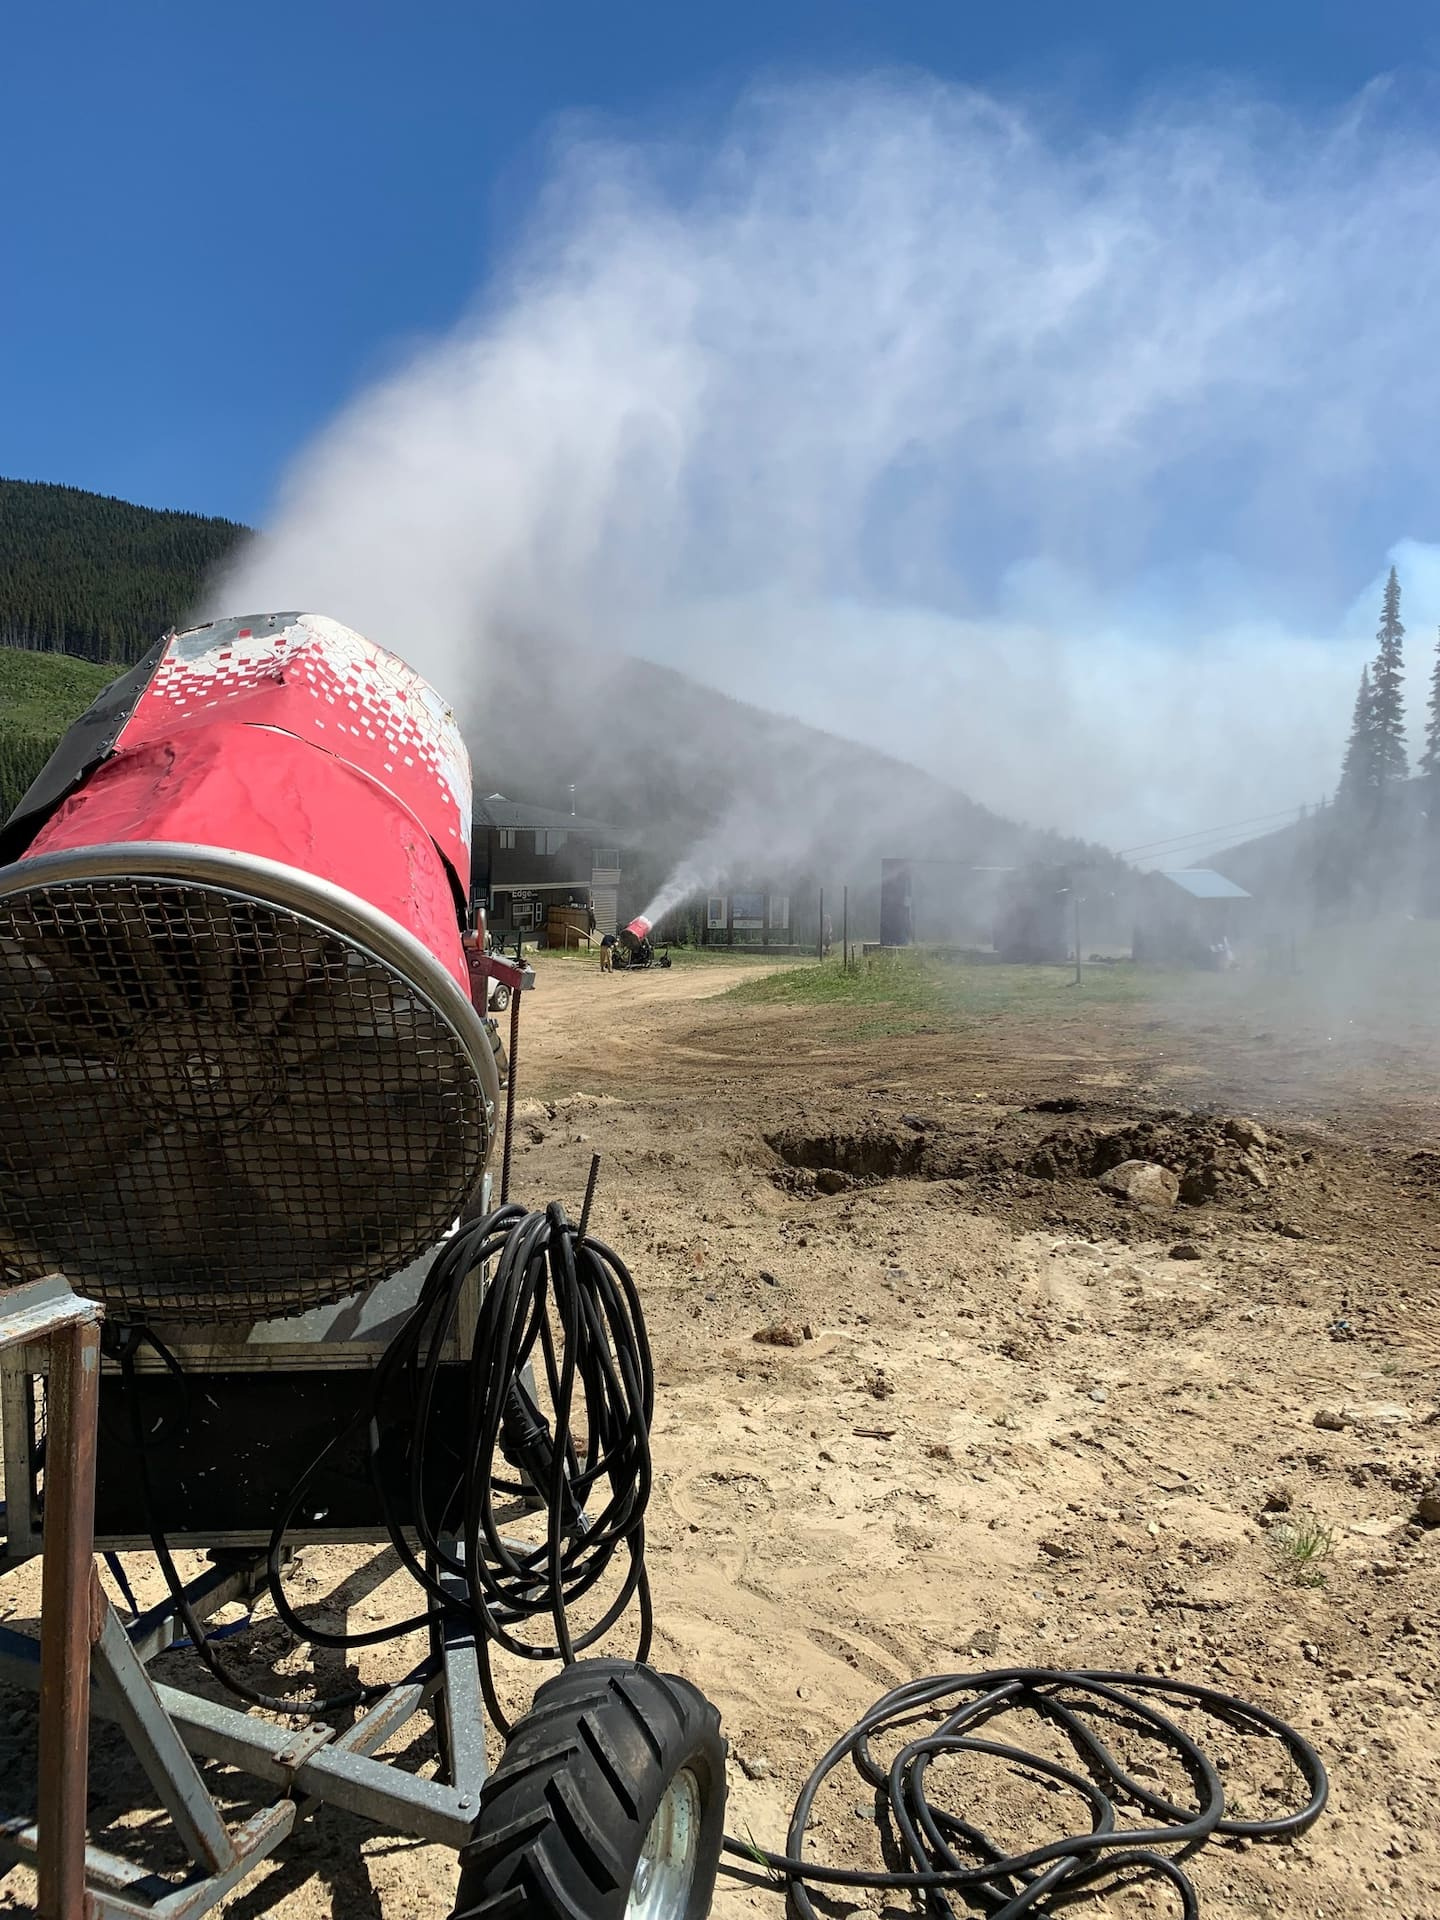 Snow cannons to fight a forest fire